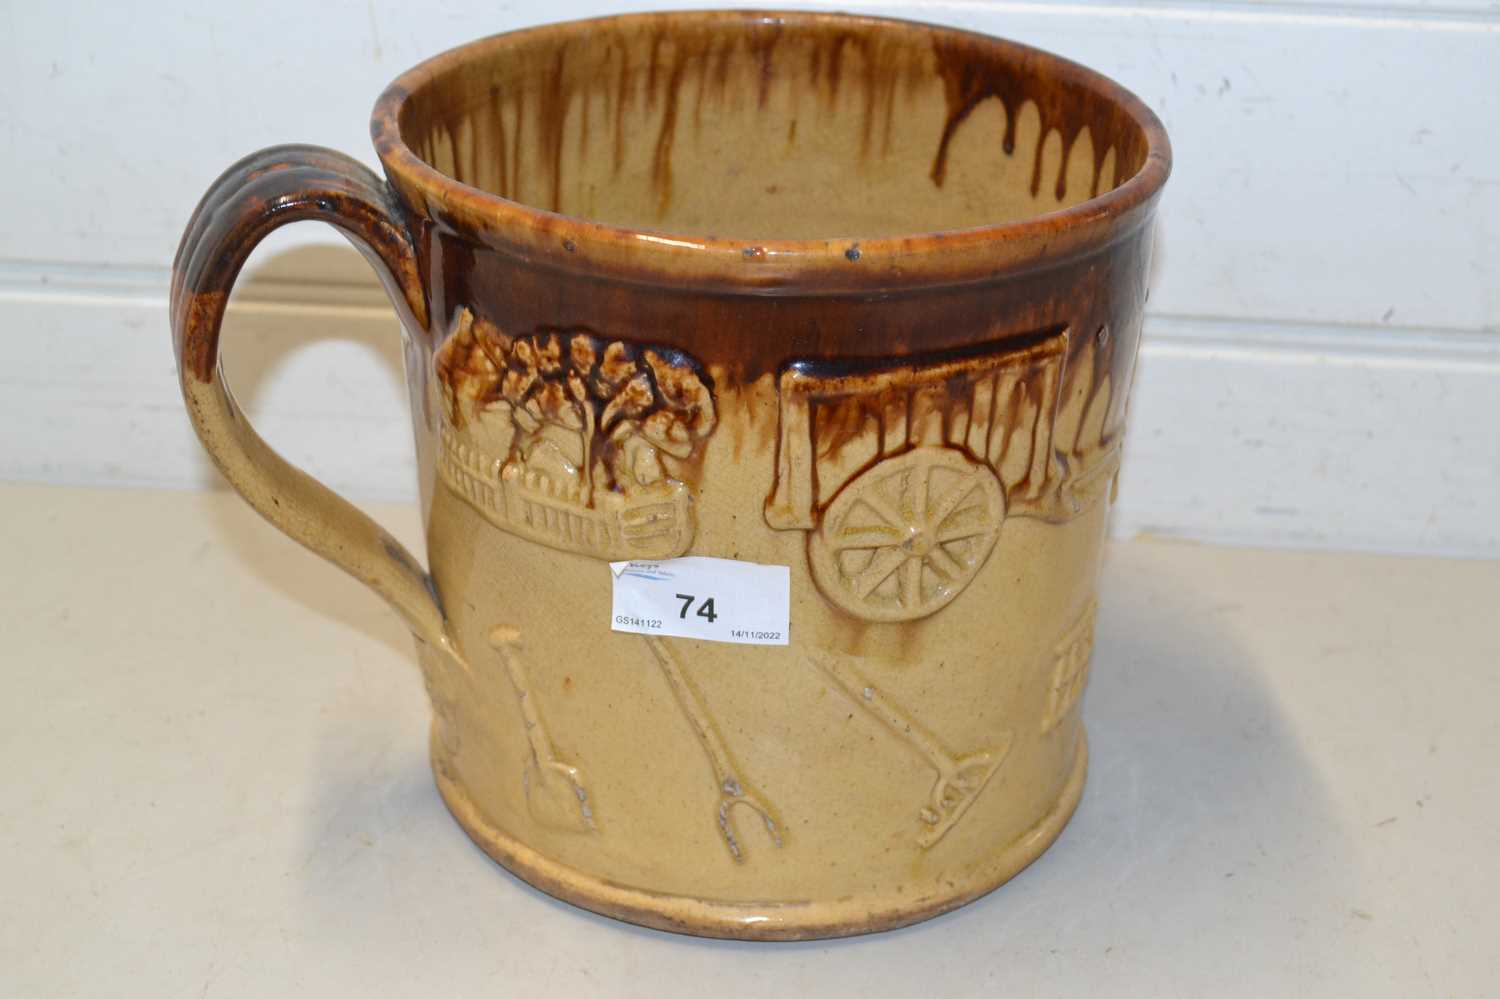 Large treacle glazed tankard decorated with various sprigs of country scenes, farm implements etc